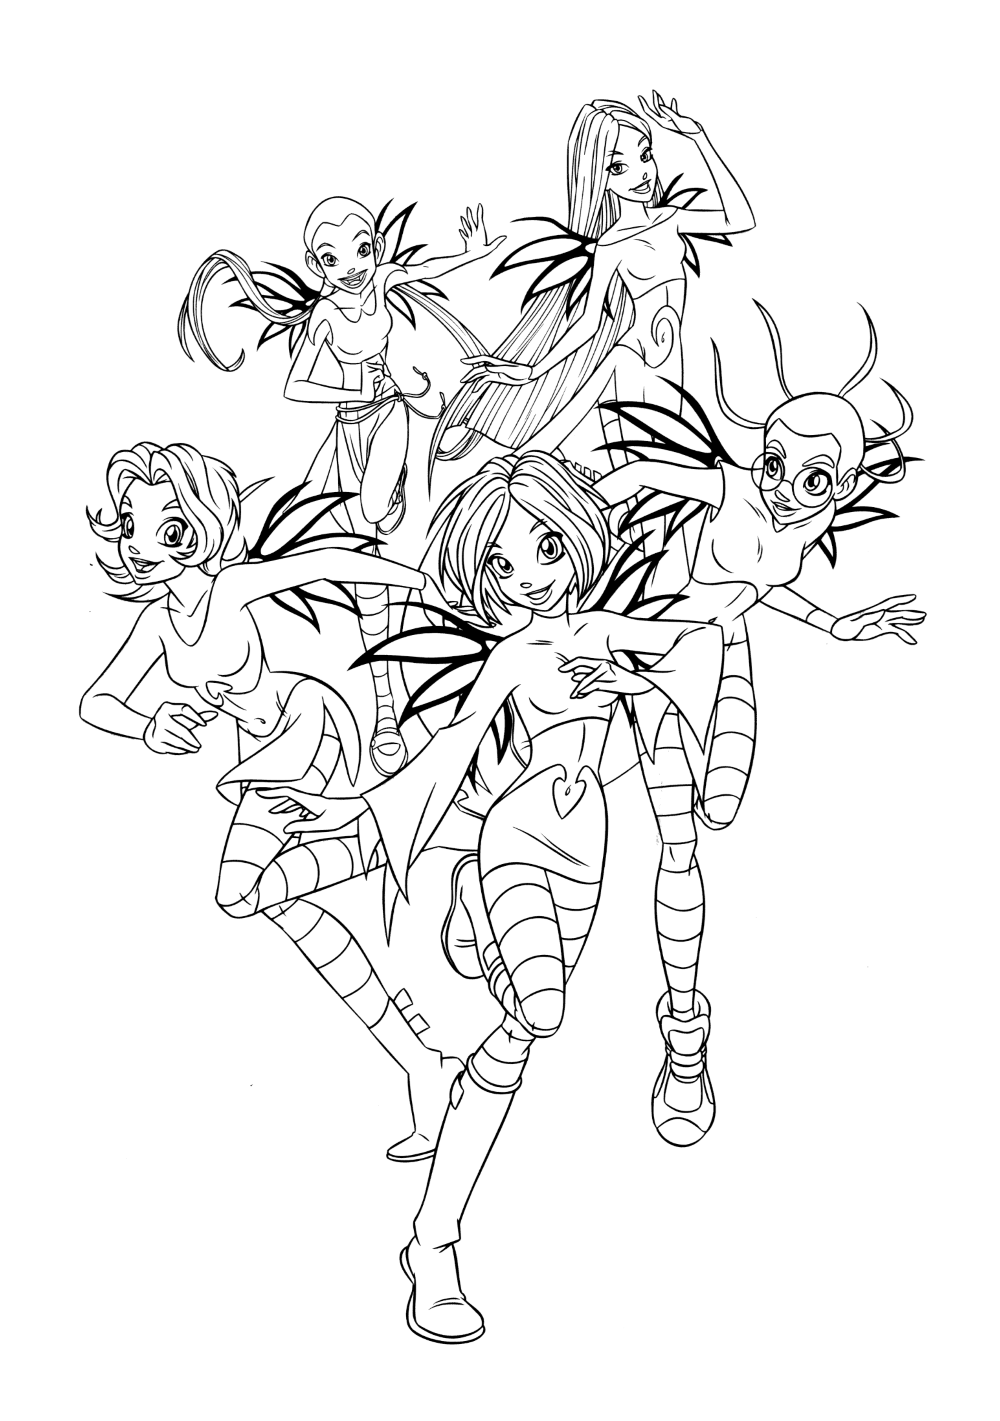 Coloring page - Witches